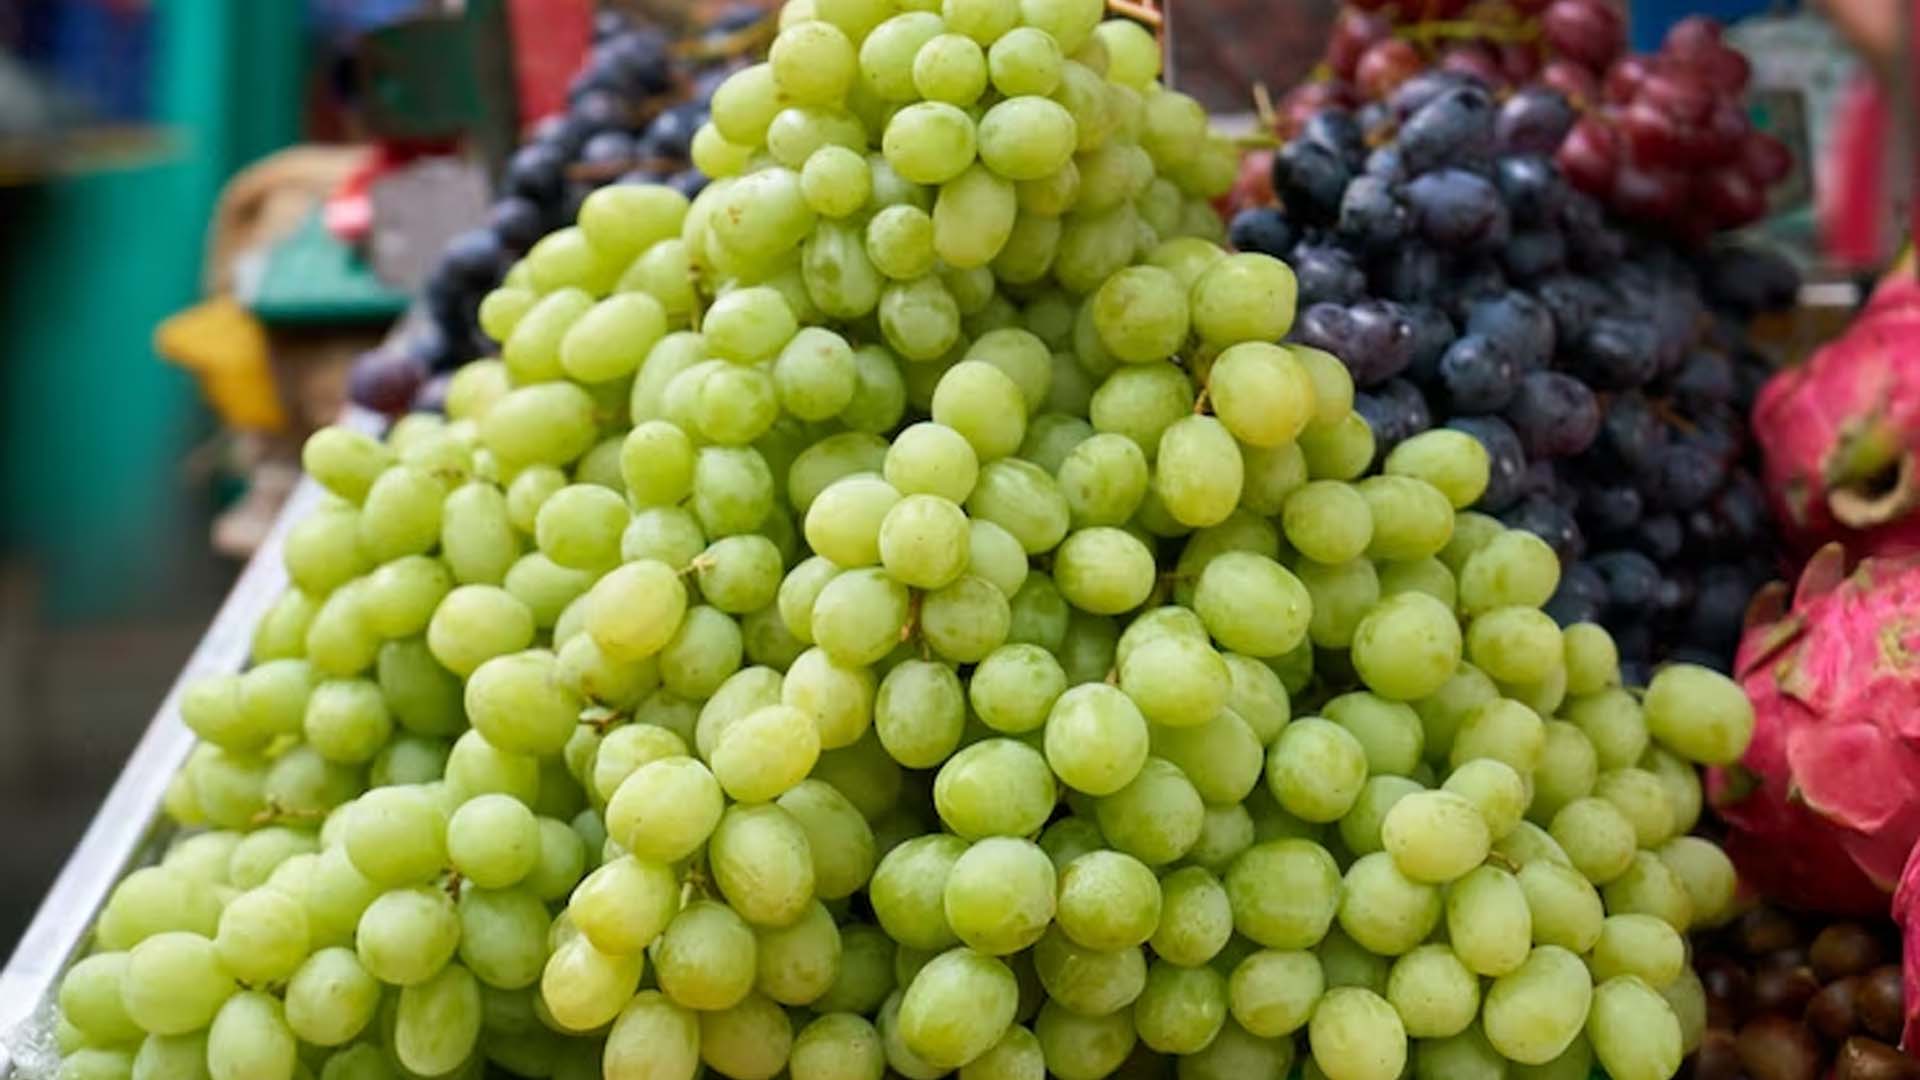 Grapes Causing Cough